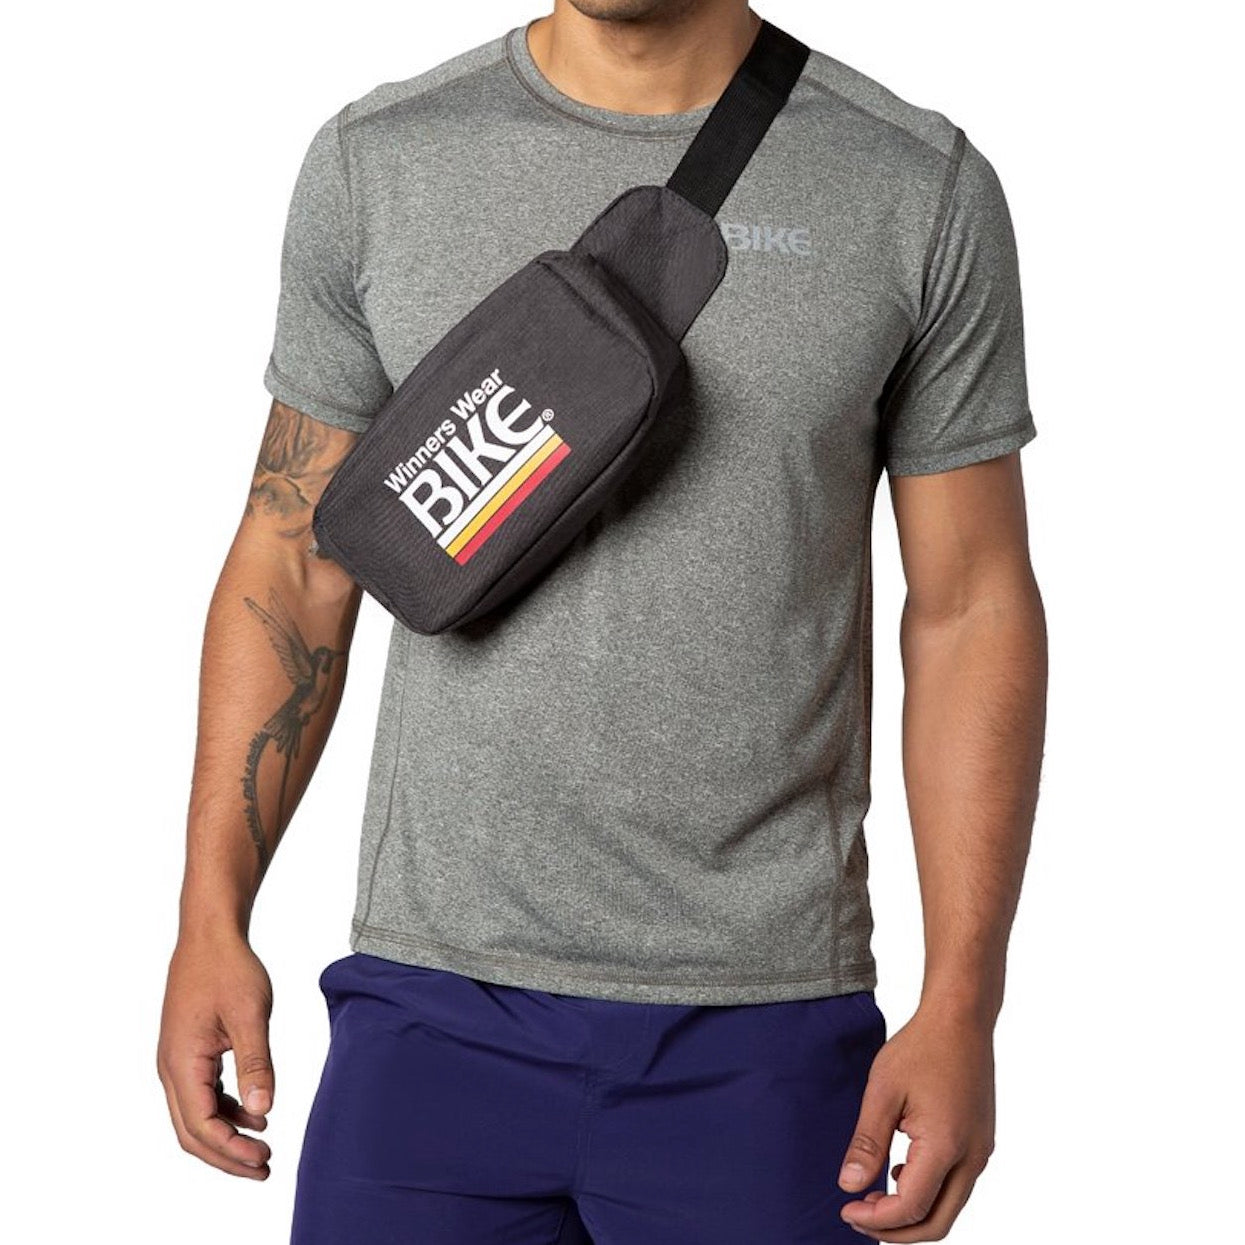 Man wearing BIKE® black fanny pack and accessories